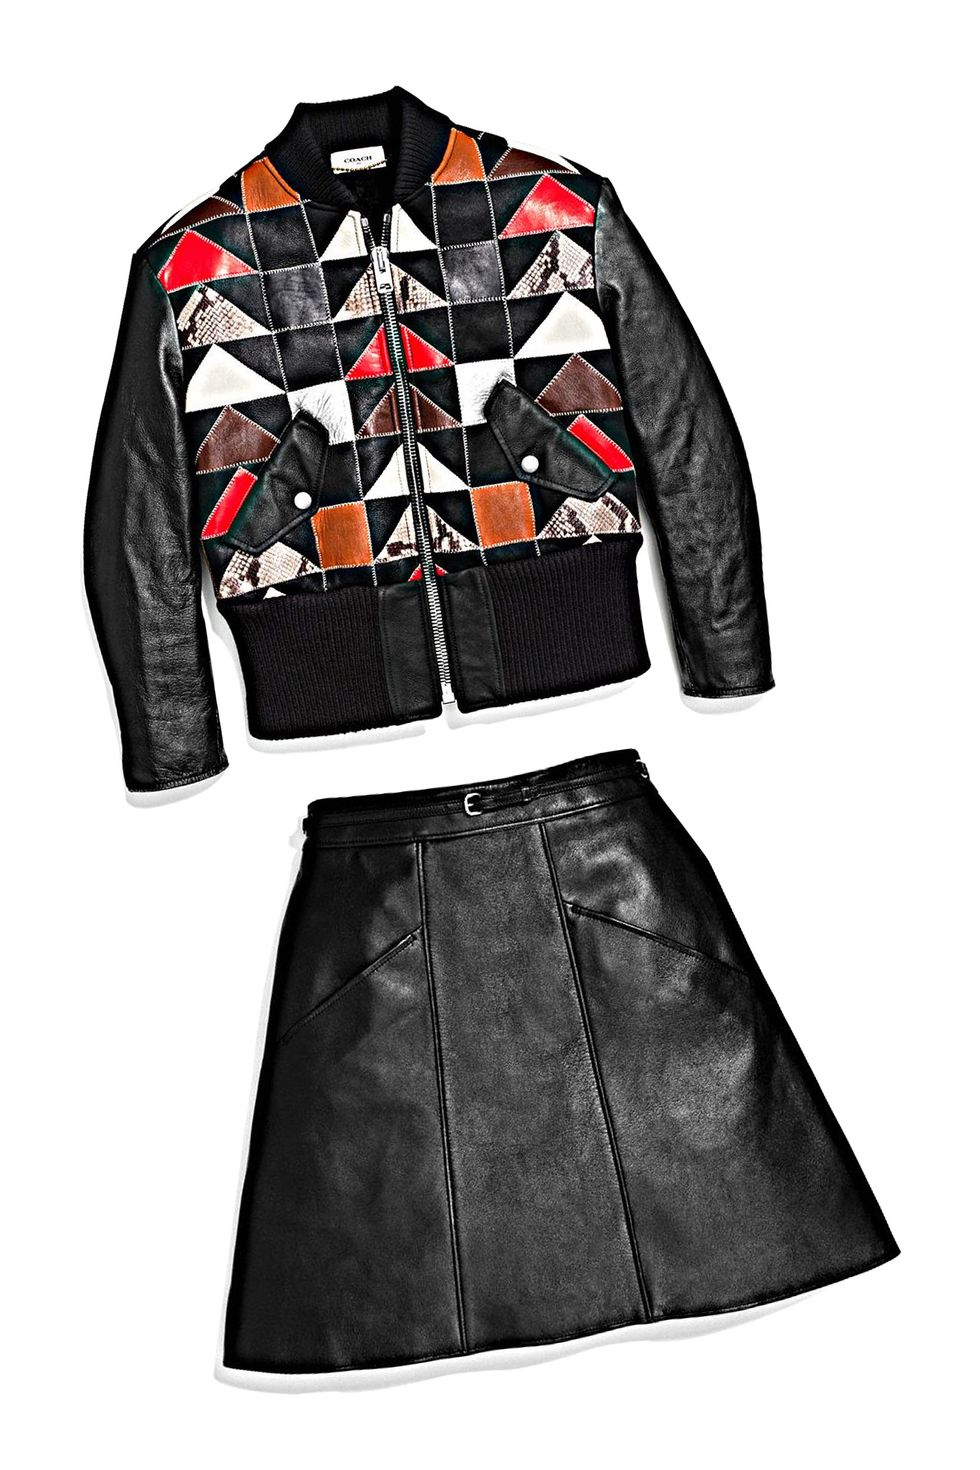 <p>When in doubt, pull that timeless little black mini out of your closet—it'll temper even the most daring top, coat, or accessory. A patchwork leather jacket feels luxe—and worn draped over the shoulders with a black tank, short skirt, and ankle boots, looks <em data-redactor-tag="em">incredibly</em> chic.
</p><p><br>
</p><p><em data-redactor-tag="em">Coach 1941 Patchwork Shearling MA-1 Jacket, $2295, <a rel="noskim" href="http://www.coach.com/coach-designer-vest-patchwork-shearling-ma-1-jacket/56335.html?CID=D_B_HBZ_11851" target="_blank">coach.com</a>; Coach 1941 Leather A-Line Skirt, $695, <a rel="noskim" href="http://www.coach.com/coach-designer-pants-leather-a-line-skirt/56692.html?CID=D_B_HBZ_11852" target="_blank">coach.com</a></em><span class="redactor-invisible-space" data-verified="redactor" data-redactor-tag="span" data-redactor-class="redactor-invisible-space"><em data-redactor-tag="em"></em></span></p>